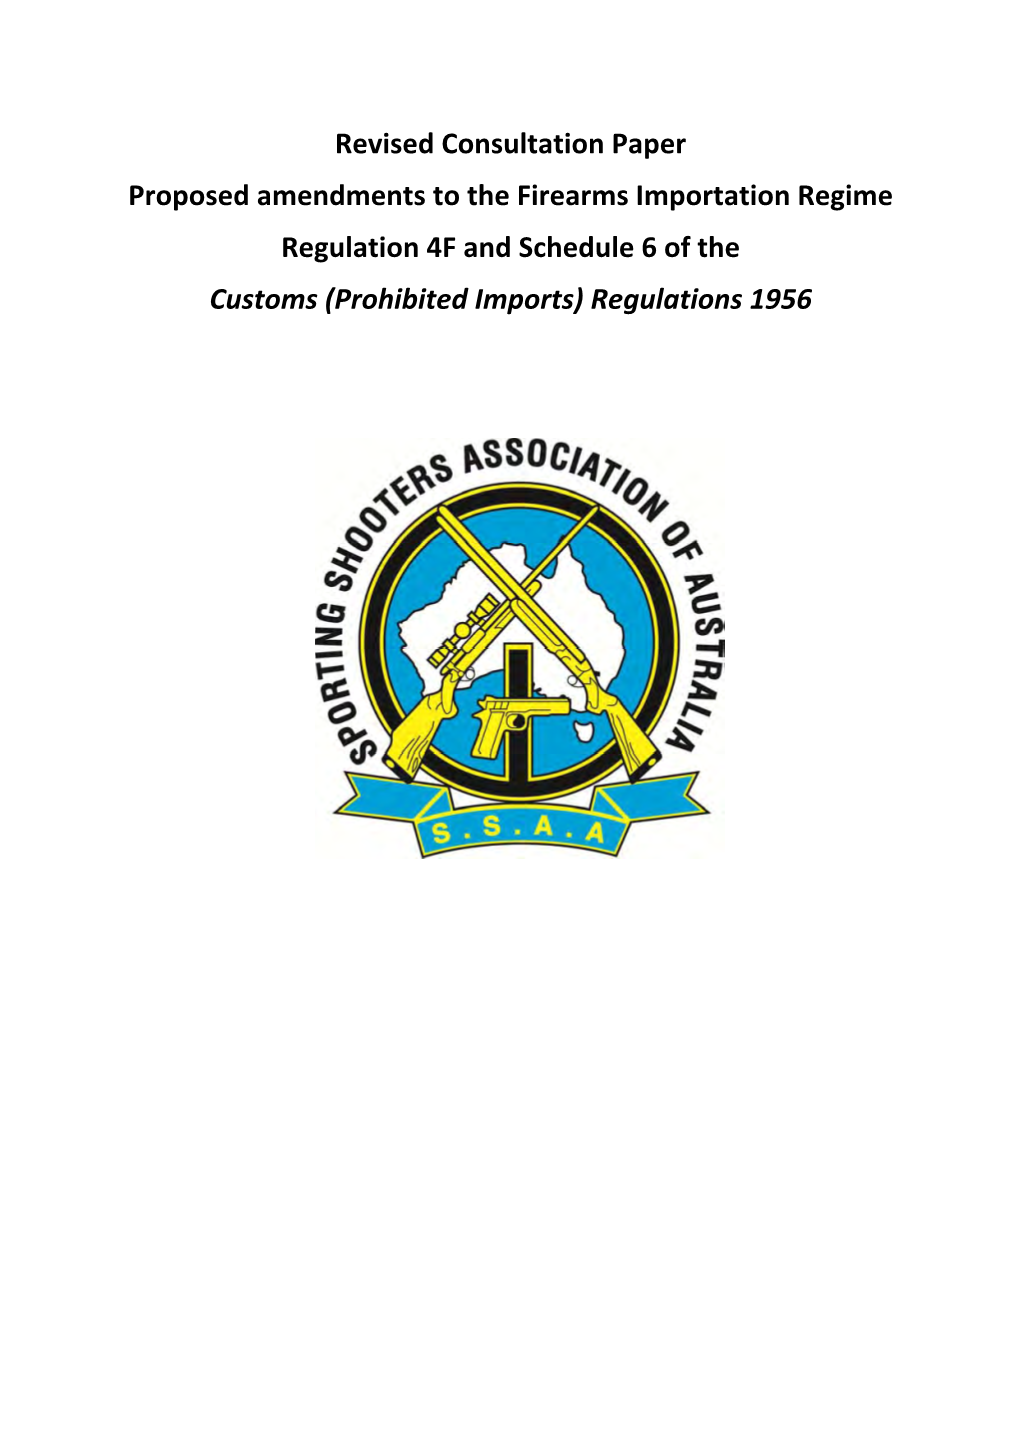 Revised Consultation Paper Proposed Amendments to the Firearms Importation Regime Regulation 4F and Schedule 6 of the Customs (Prohibited Imports) Regulations 1956